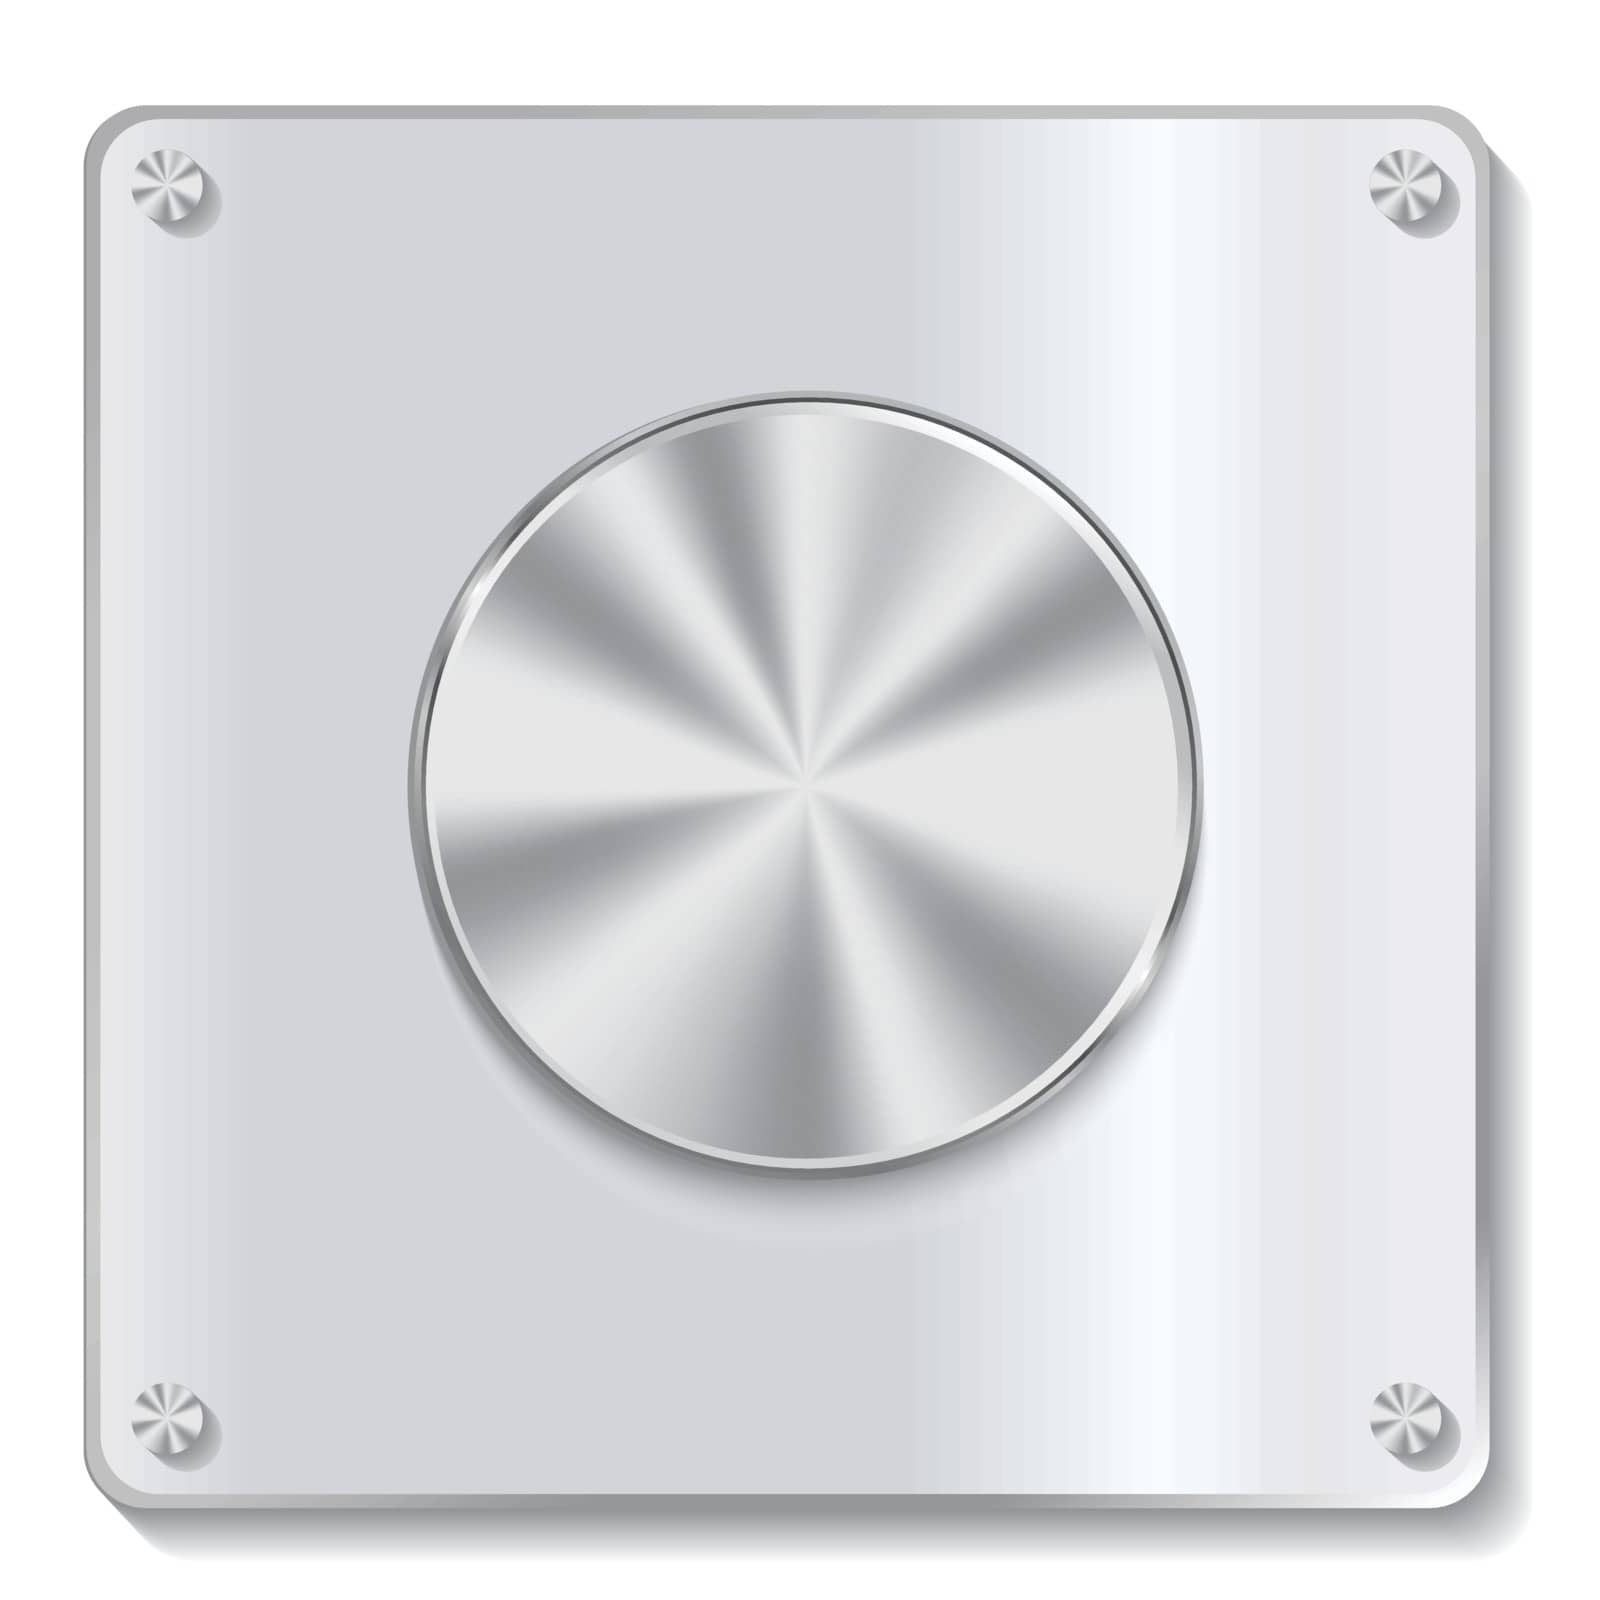 Realistic metal button with circular processing  or volume control